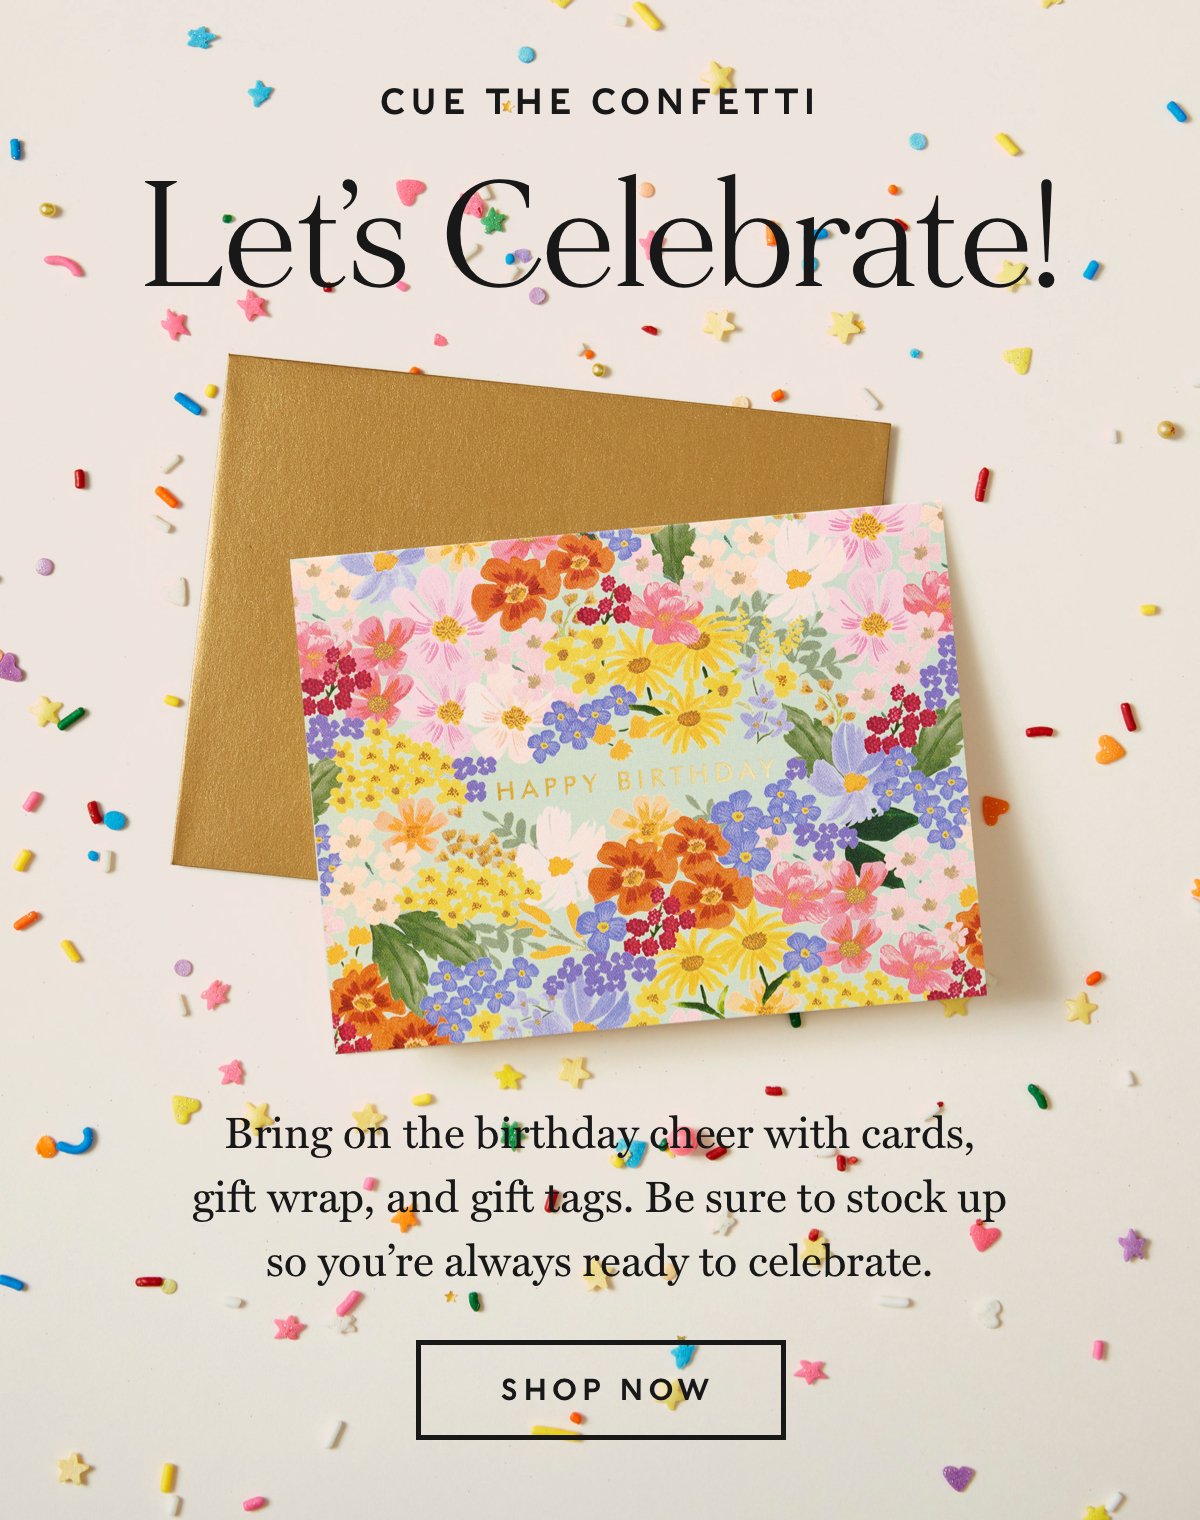 Let's celebrate. Bring on the birthday cheer with cards, gift wrap, and gift tags.